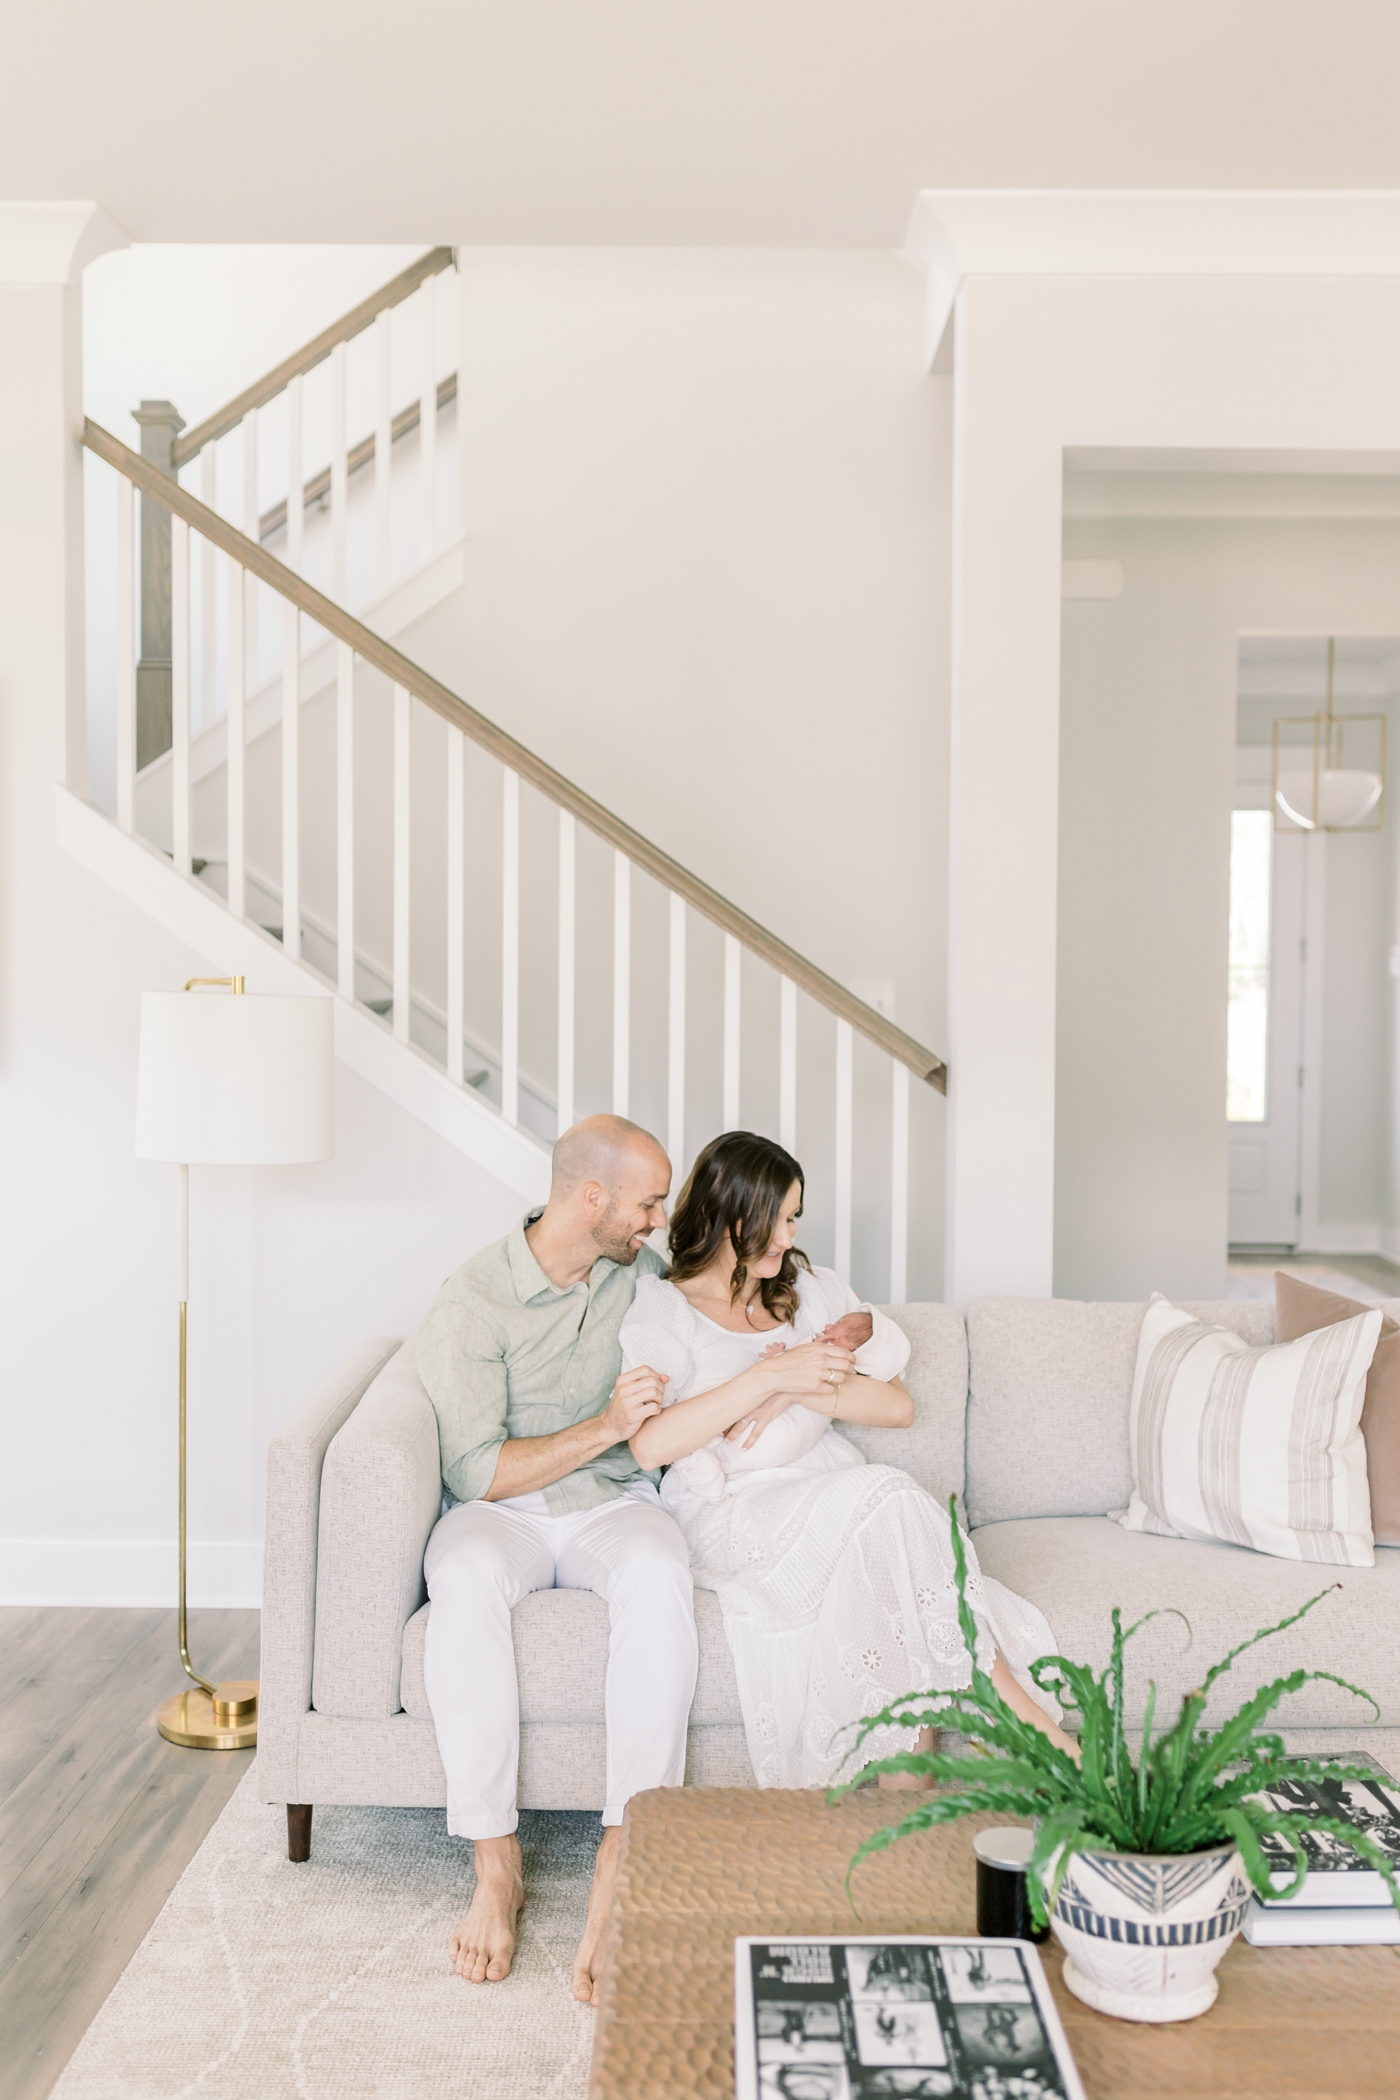 Mom and dad interacting with their new baby during their lifestyle newborn session | Photo by Caitlyn Motycka Photography